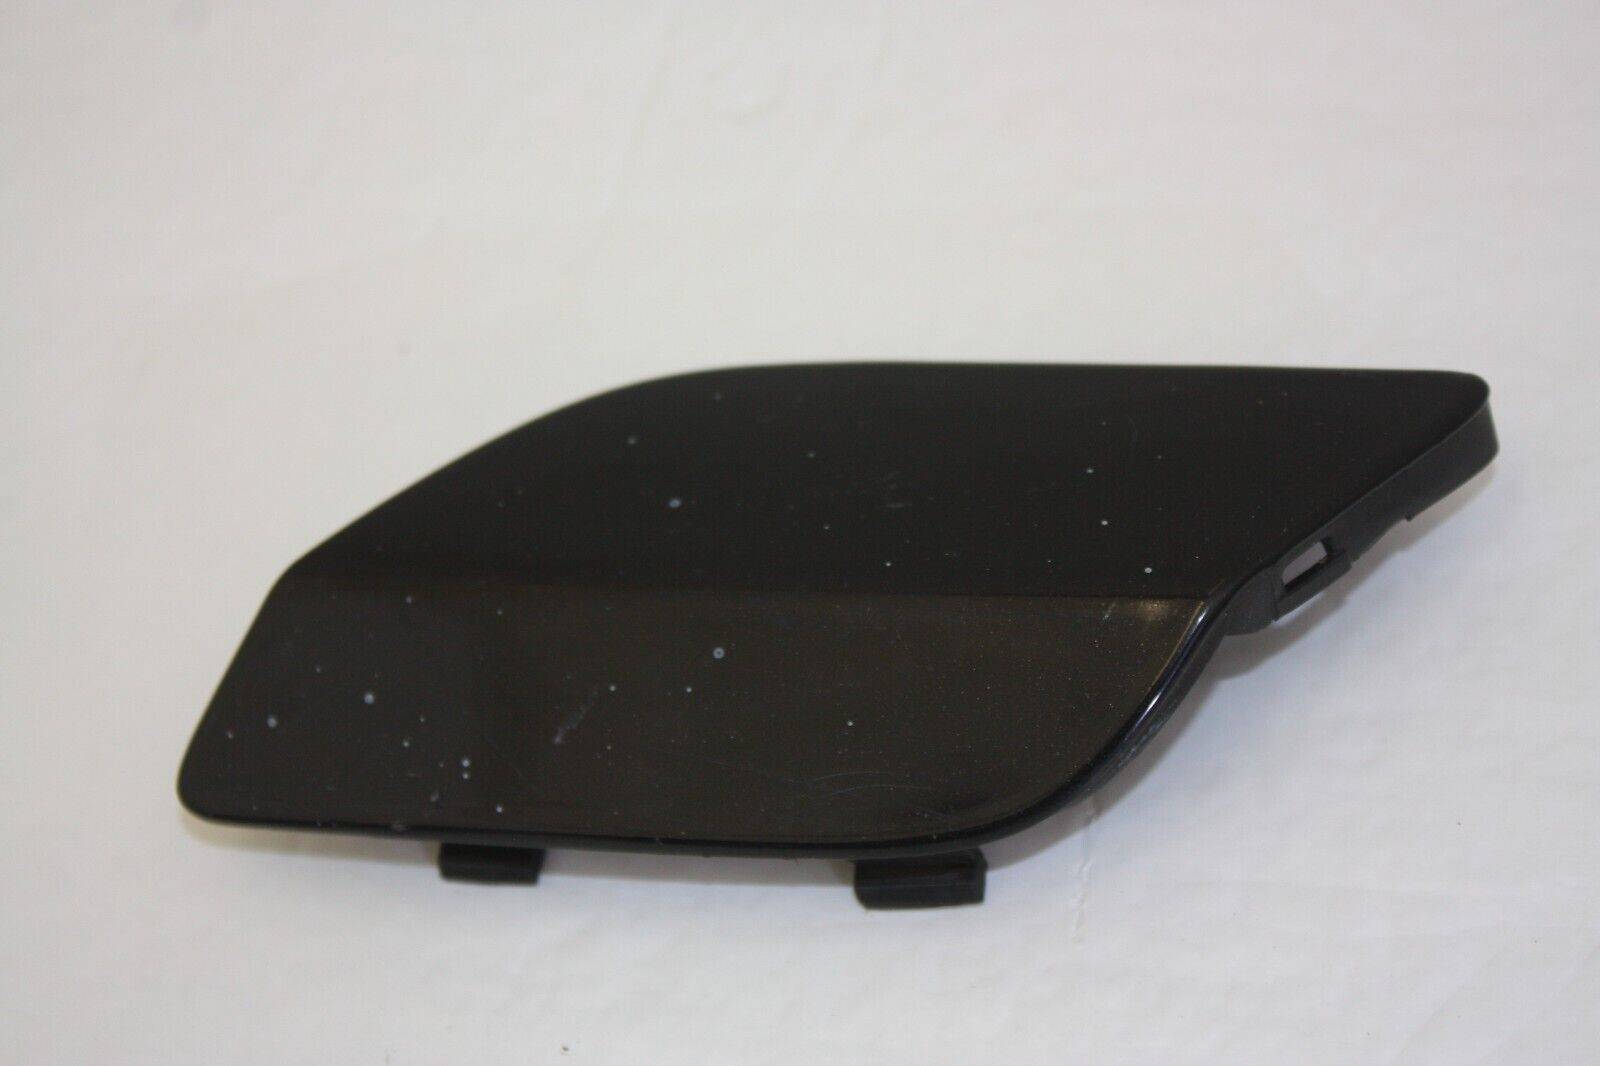 Vauxhall-Astra-H-Front-Bumper-Left-Washer-Cover-2004-to-2009-13126033-Genuine-176245366402-2